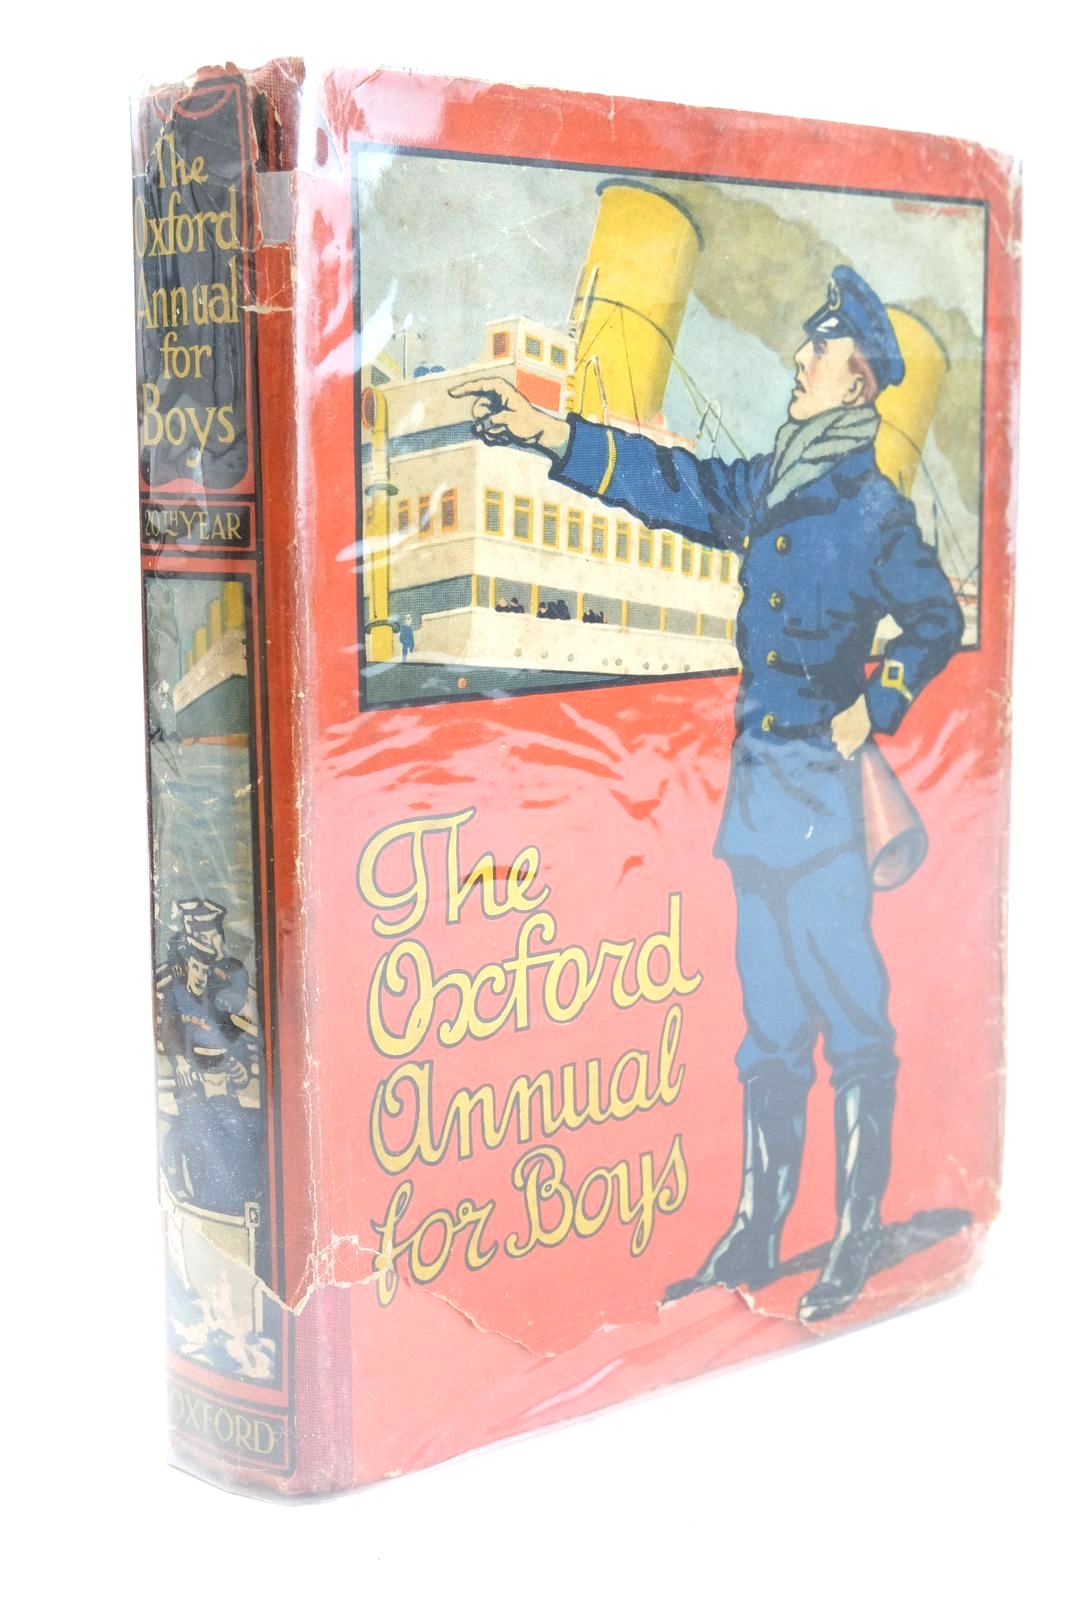 Photo of THE OXFORD ANNUAL FOR BOYS 20TH YEAR written by Strang, Herbert published by Oxford University Press, Humphrey Milford (STOCK CODE: 1324968)  for sale by Stella & Rose's Books